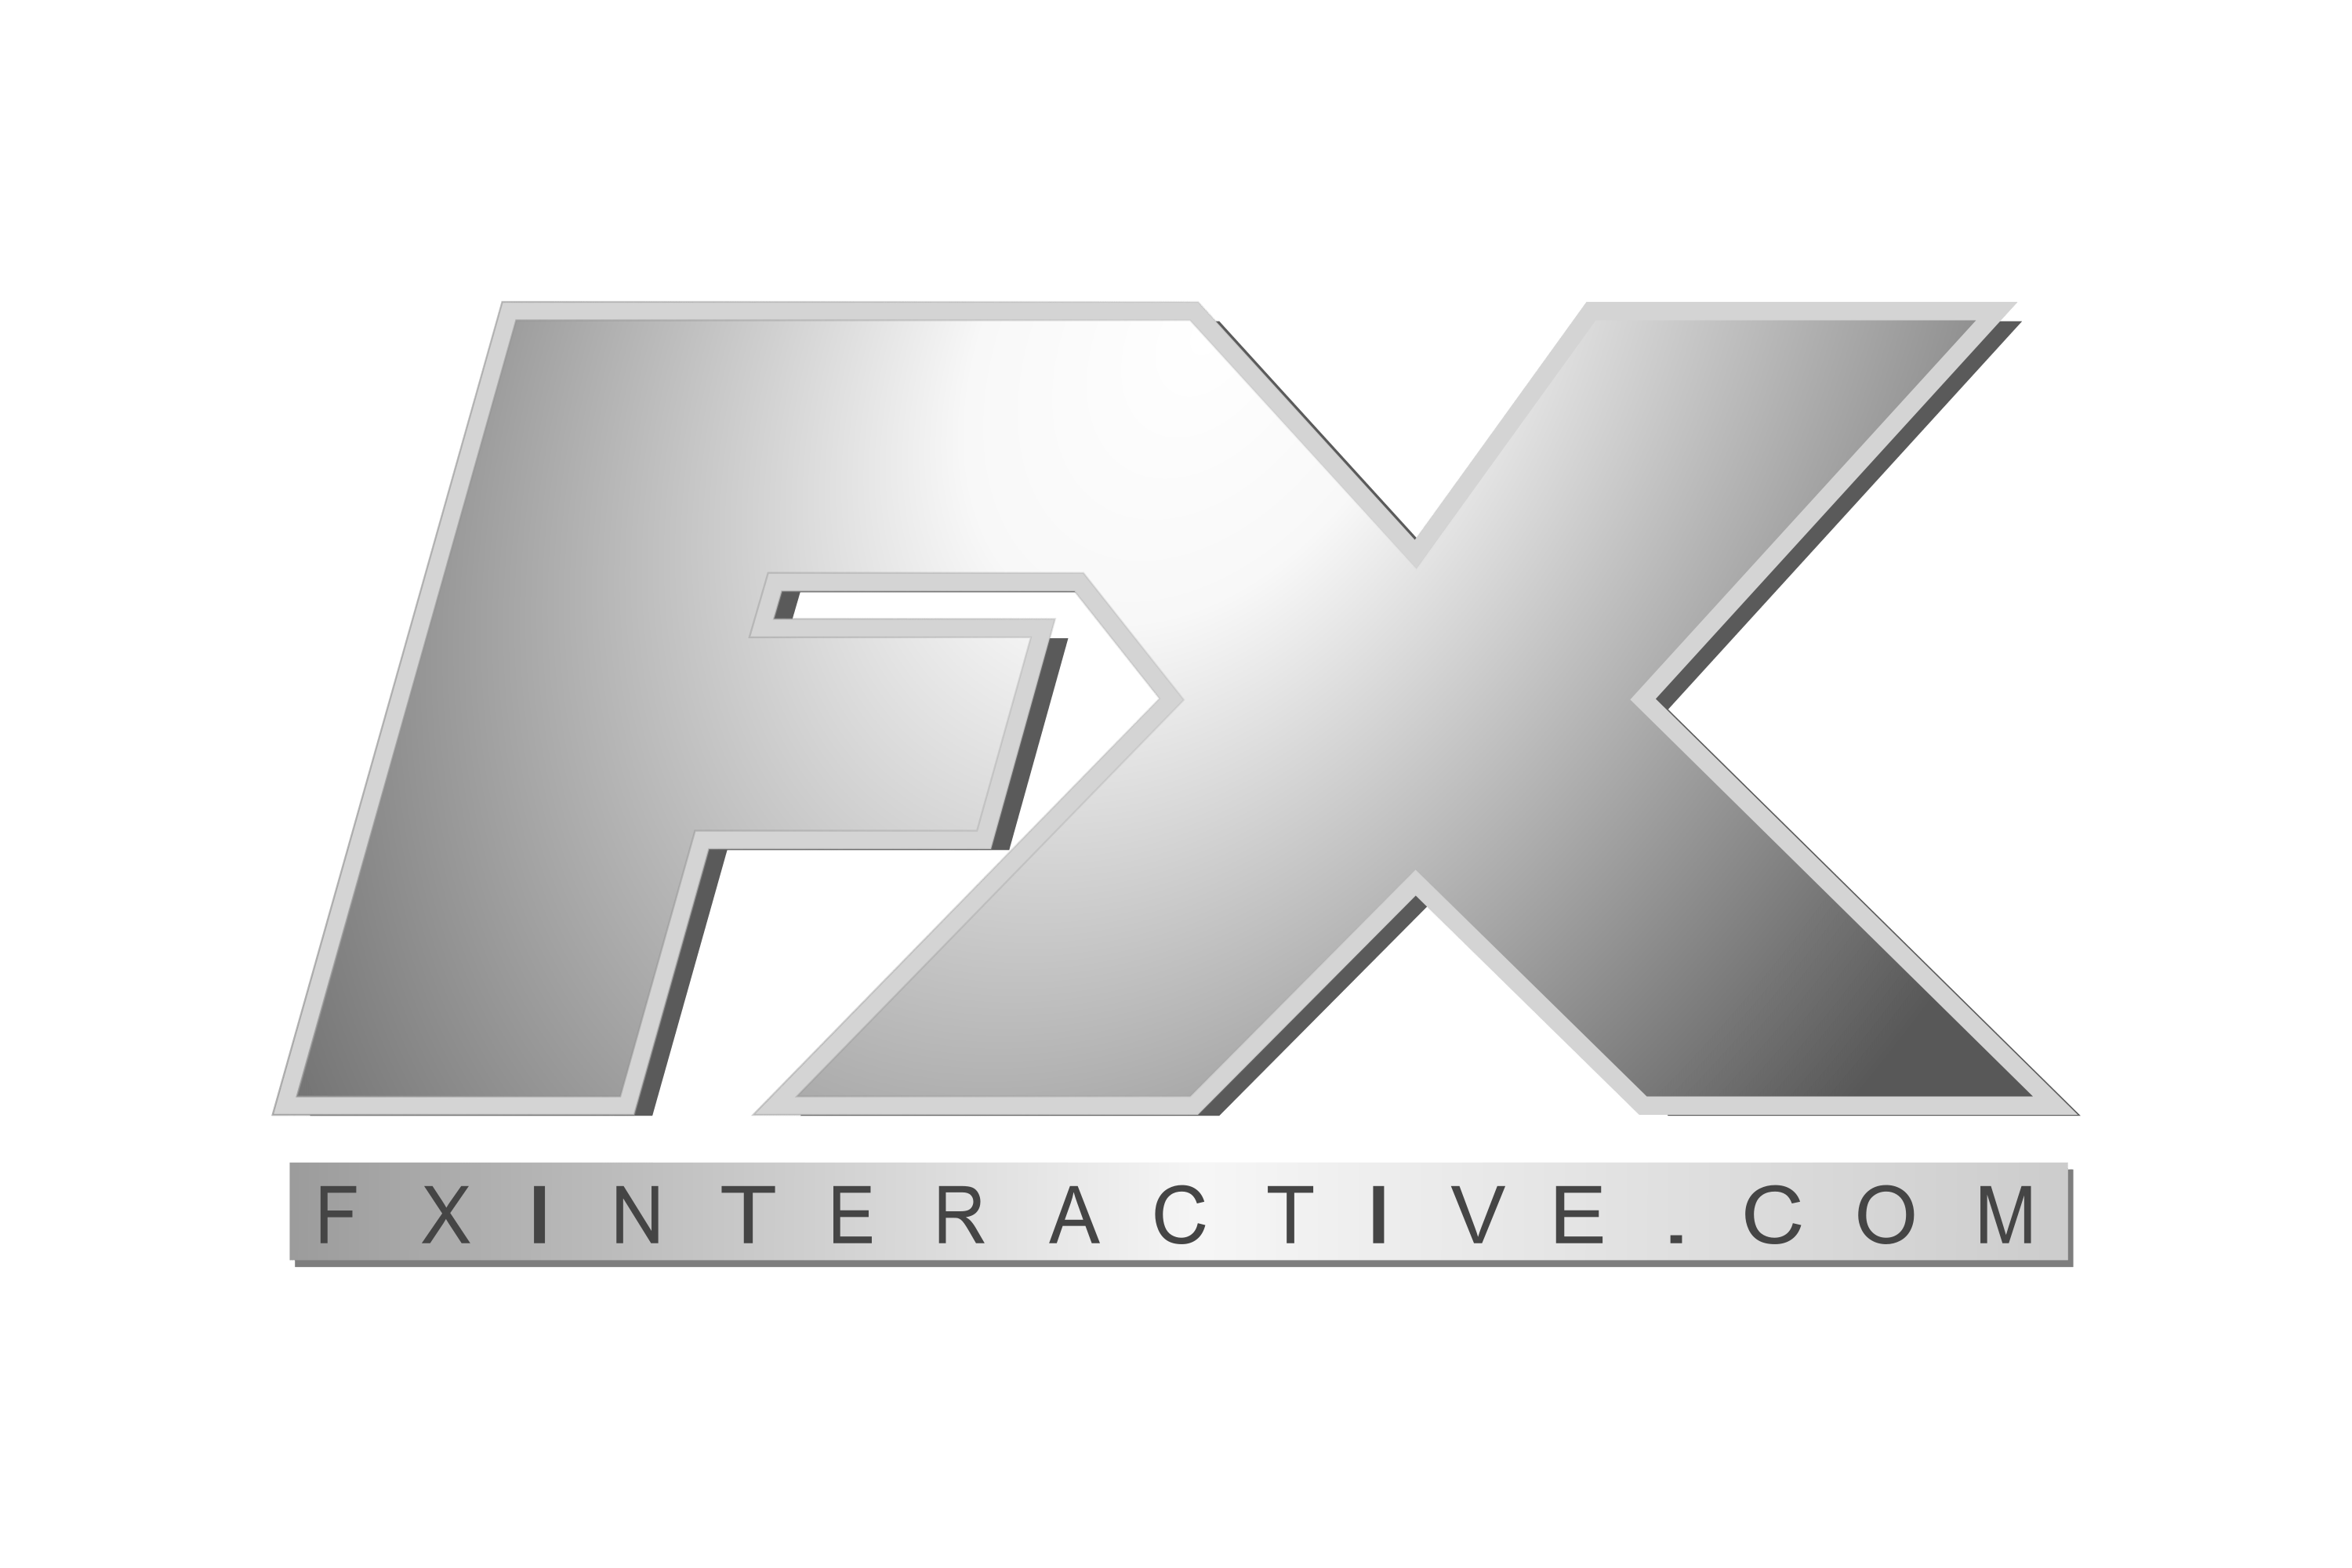 Download FX Interactive Logo in SVG Vector or PNG File Format 